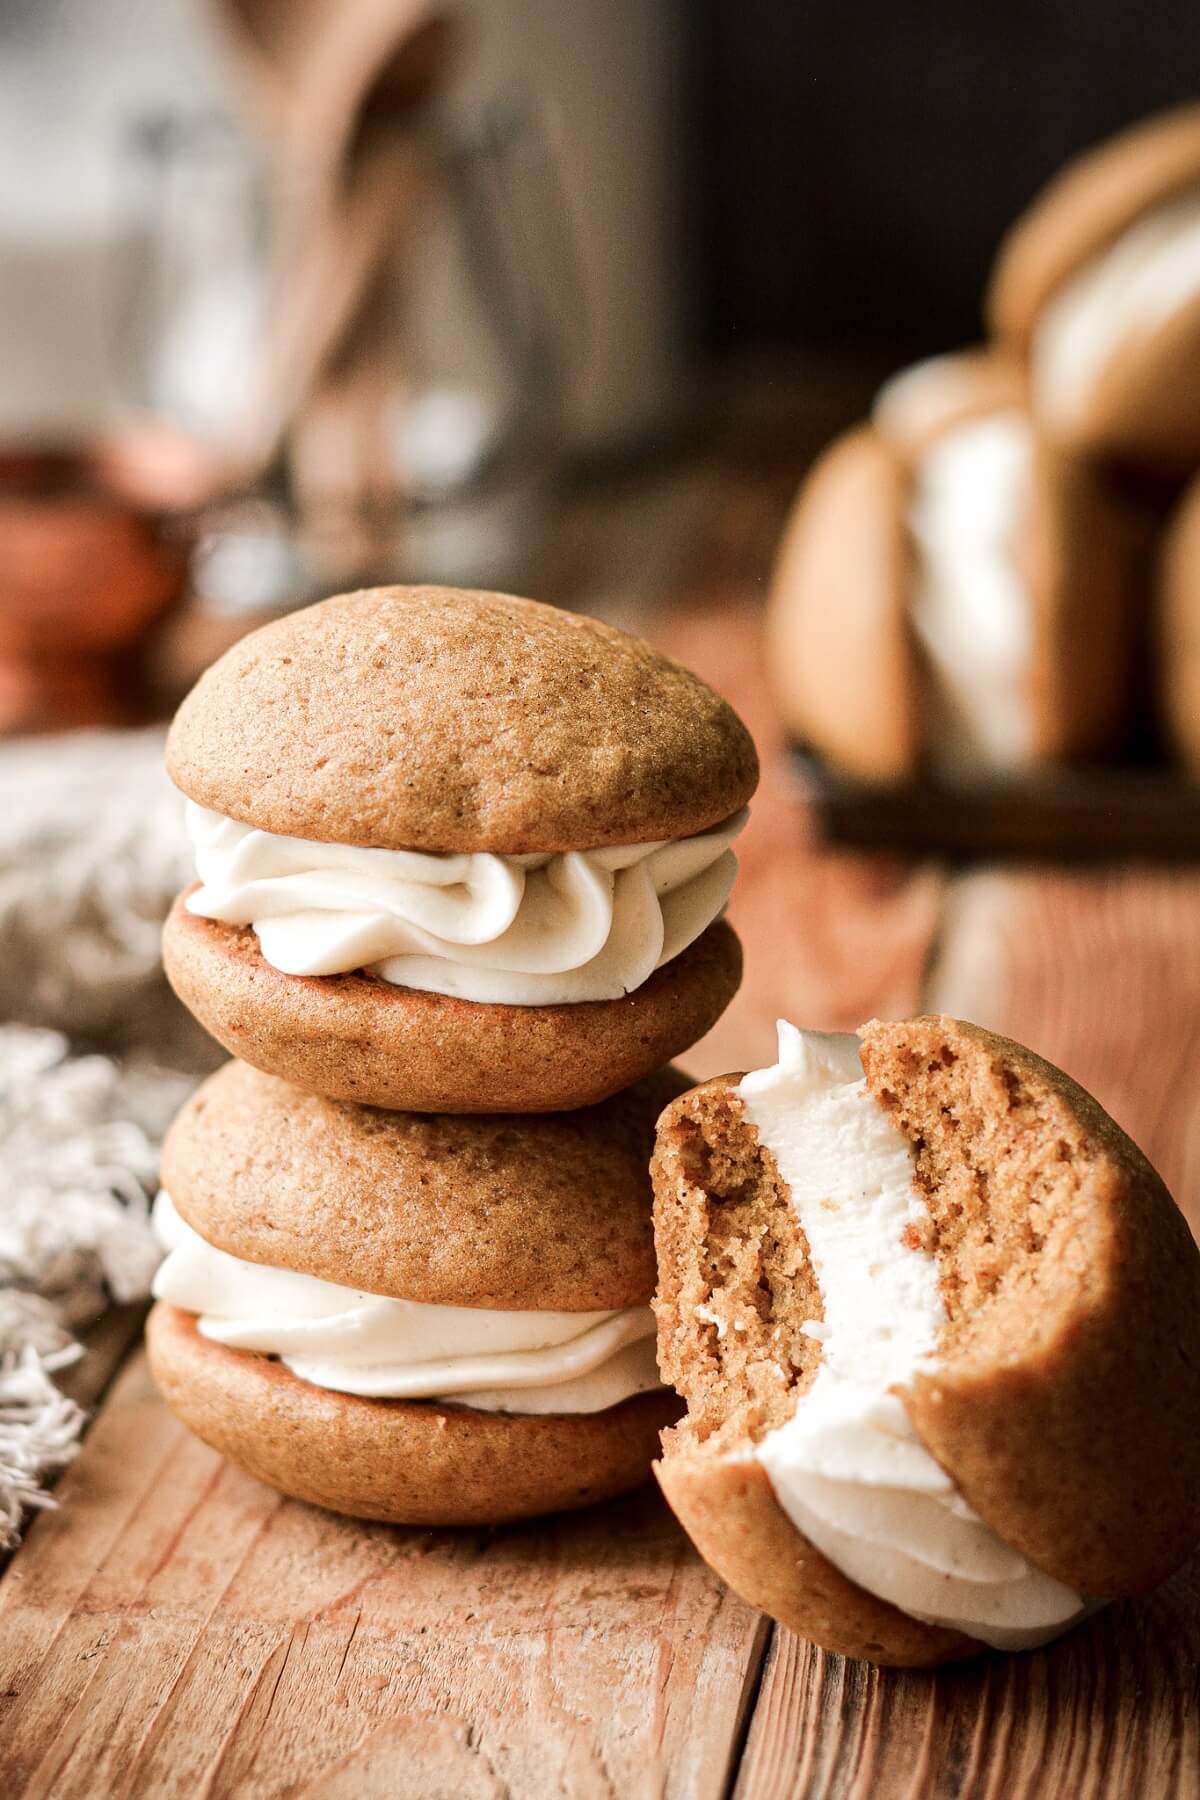 Pumpkin whoopie pies, one with a bite taken.